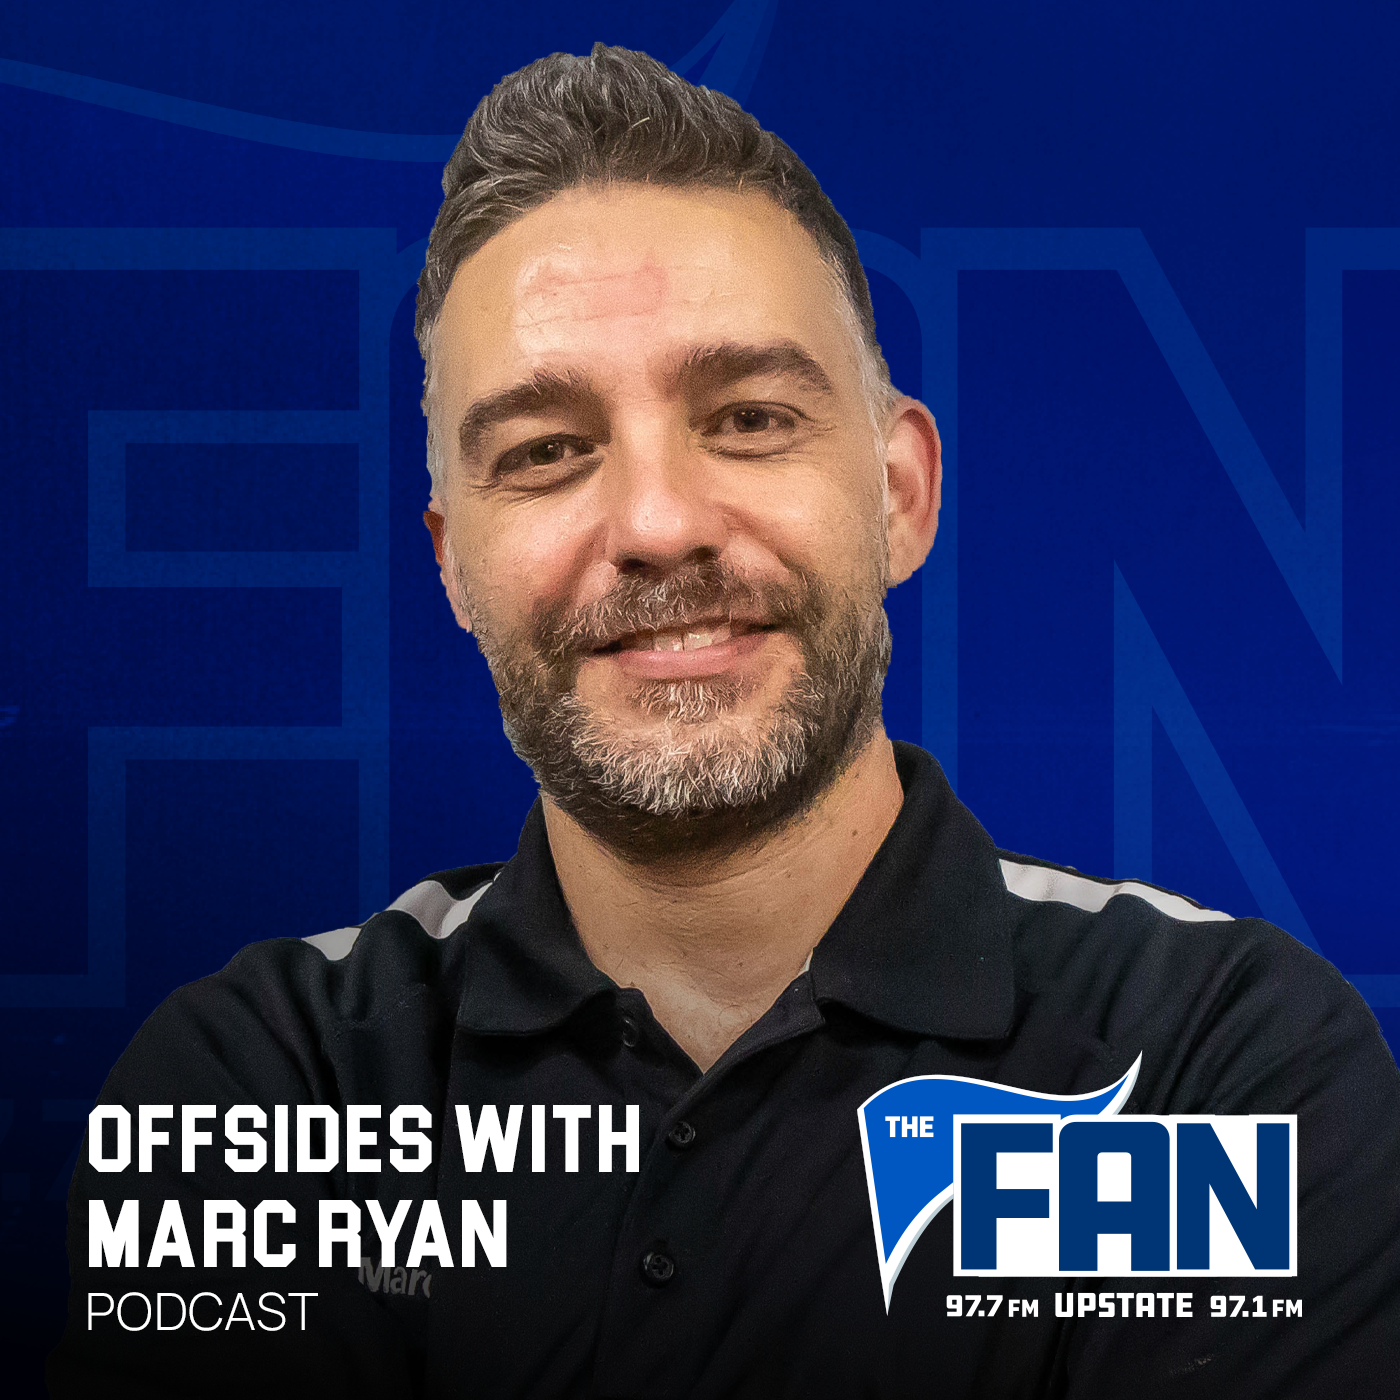 QB draft prospects hits and busts | Guest: Bill Bender, The Sporting News | Fix the upstate sports scene - Offsides 2/21 3pm Hour